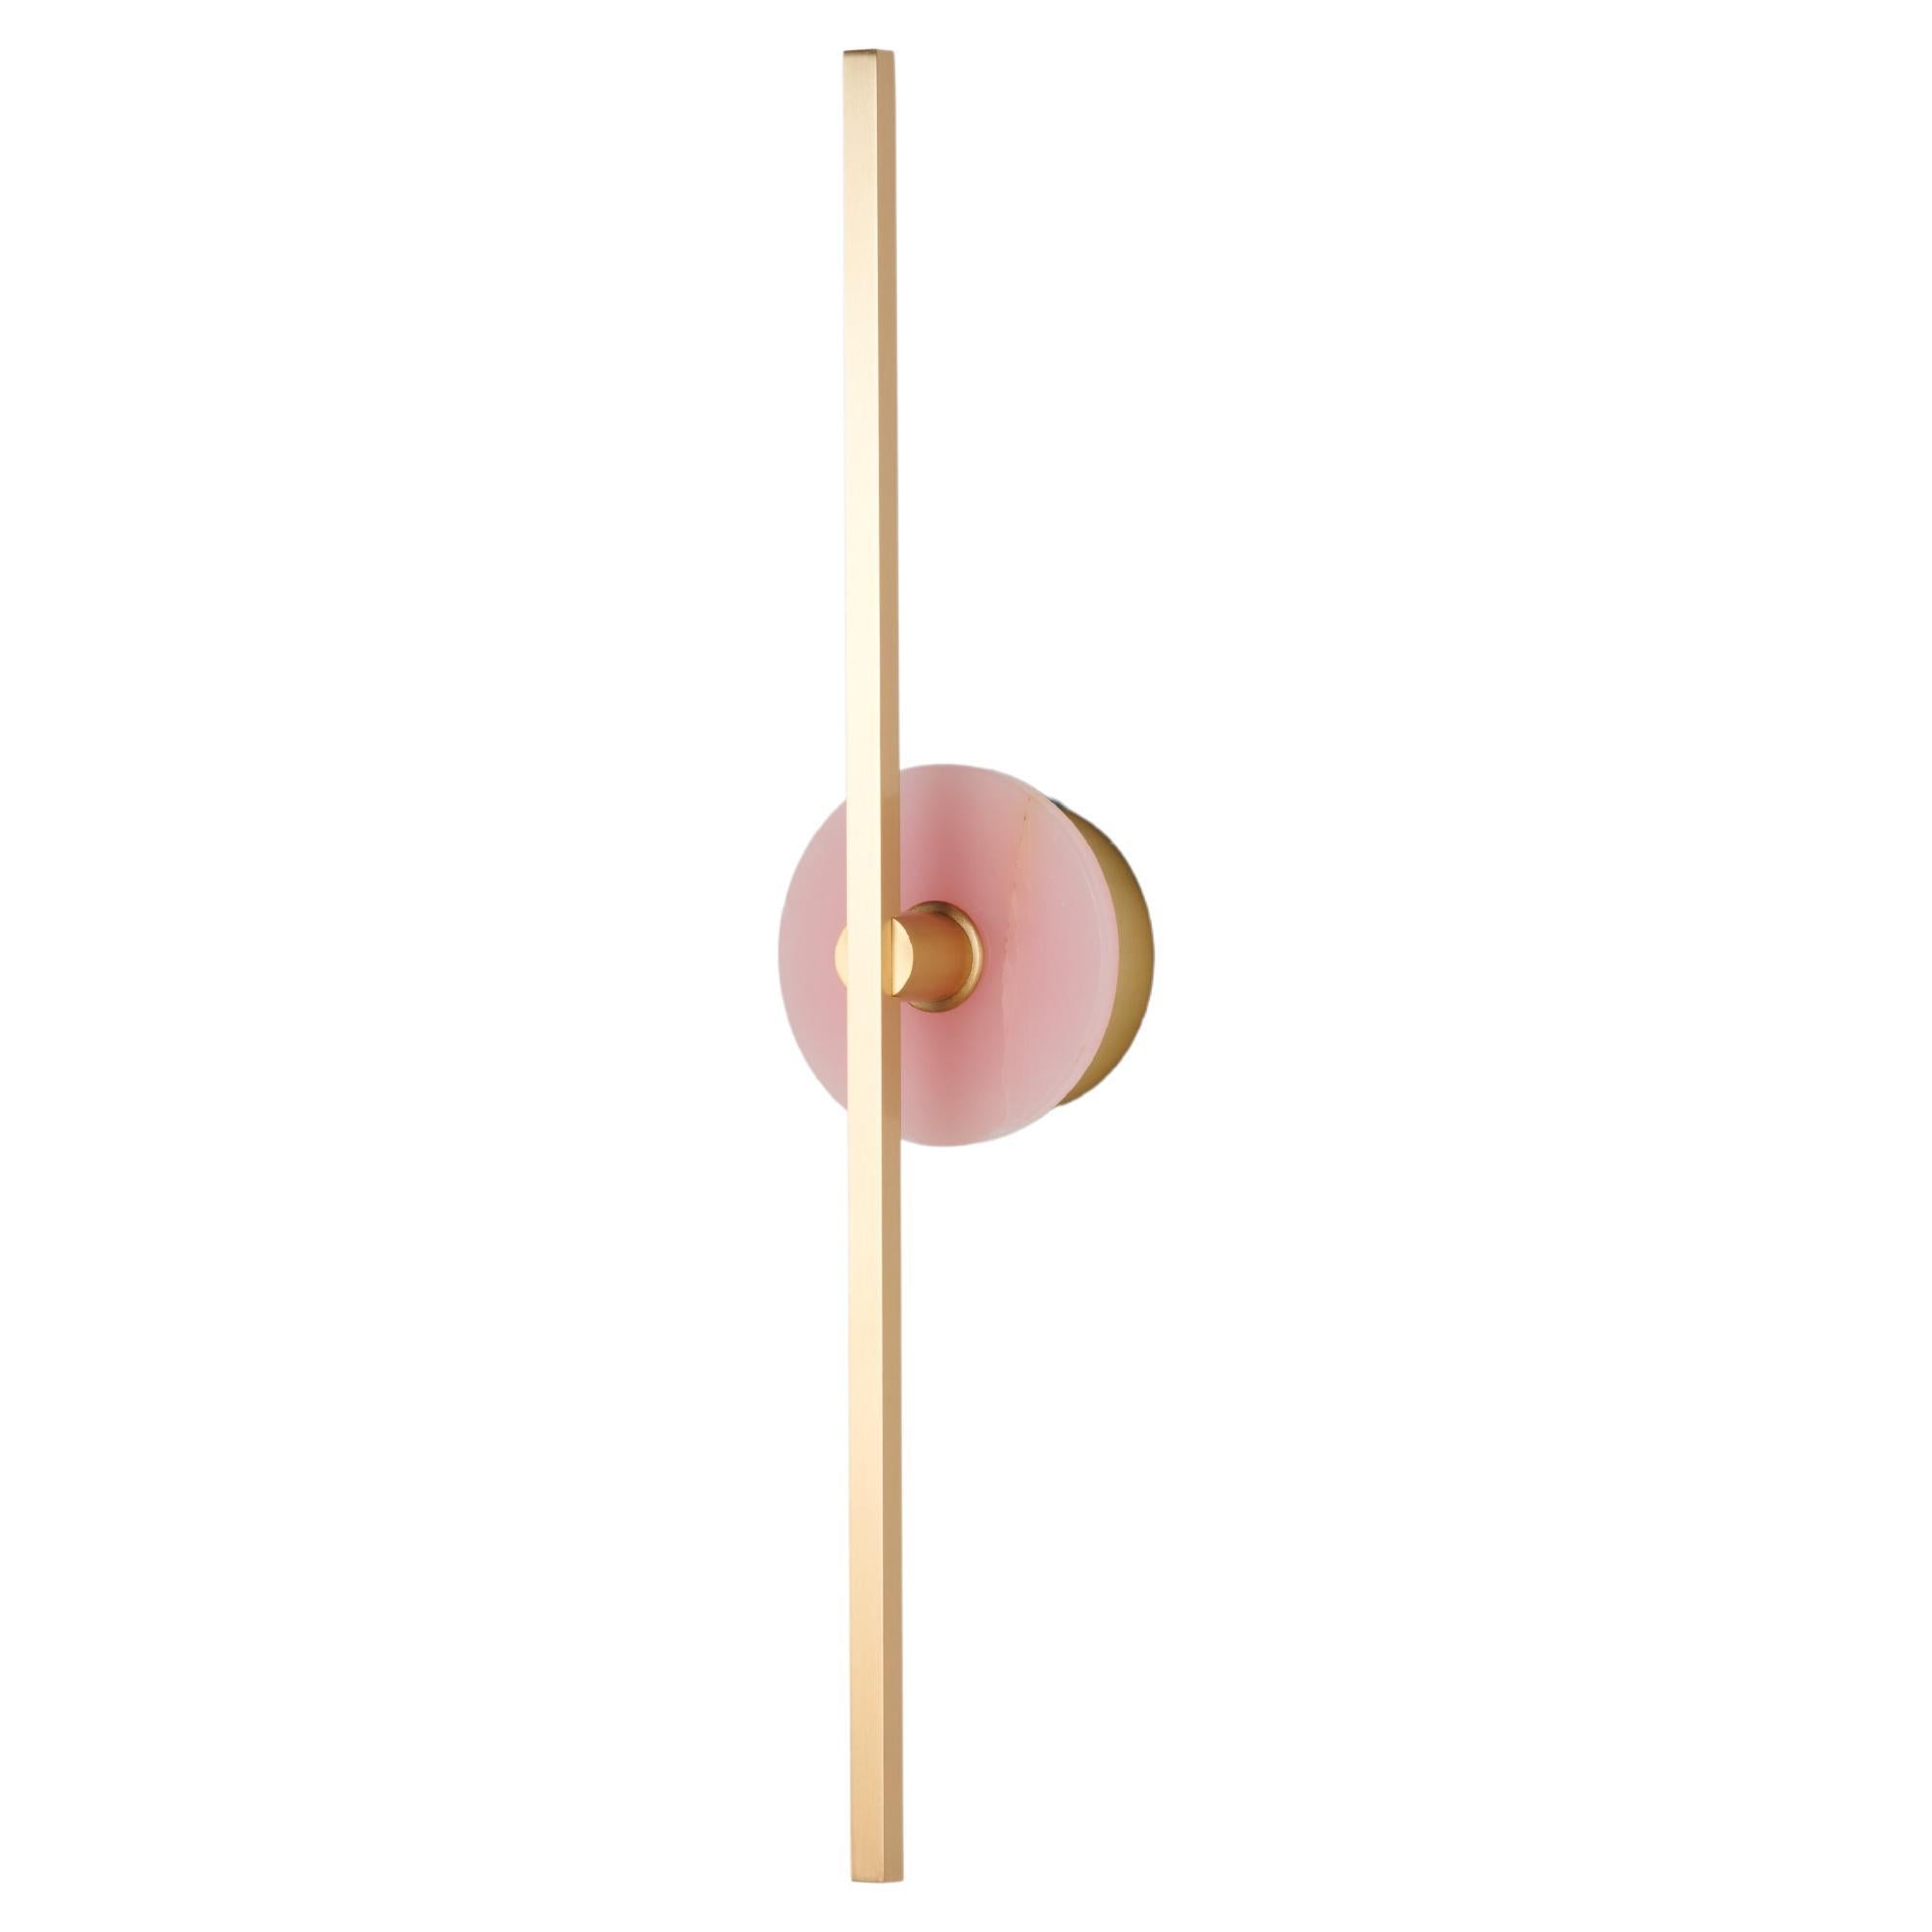 Essential Italian Wall Sconce "Stick", Brass and Pink Onyx L.E. For Sale